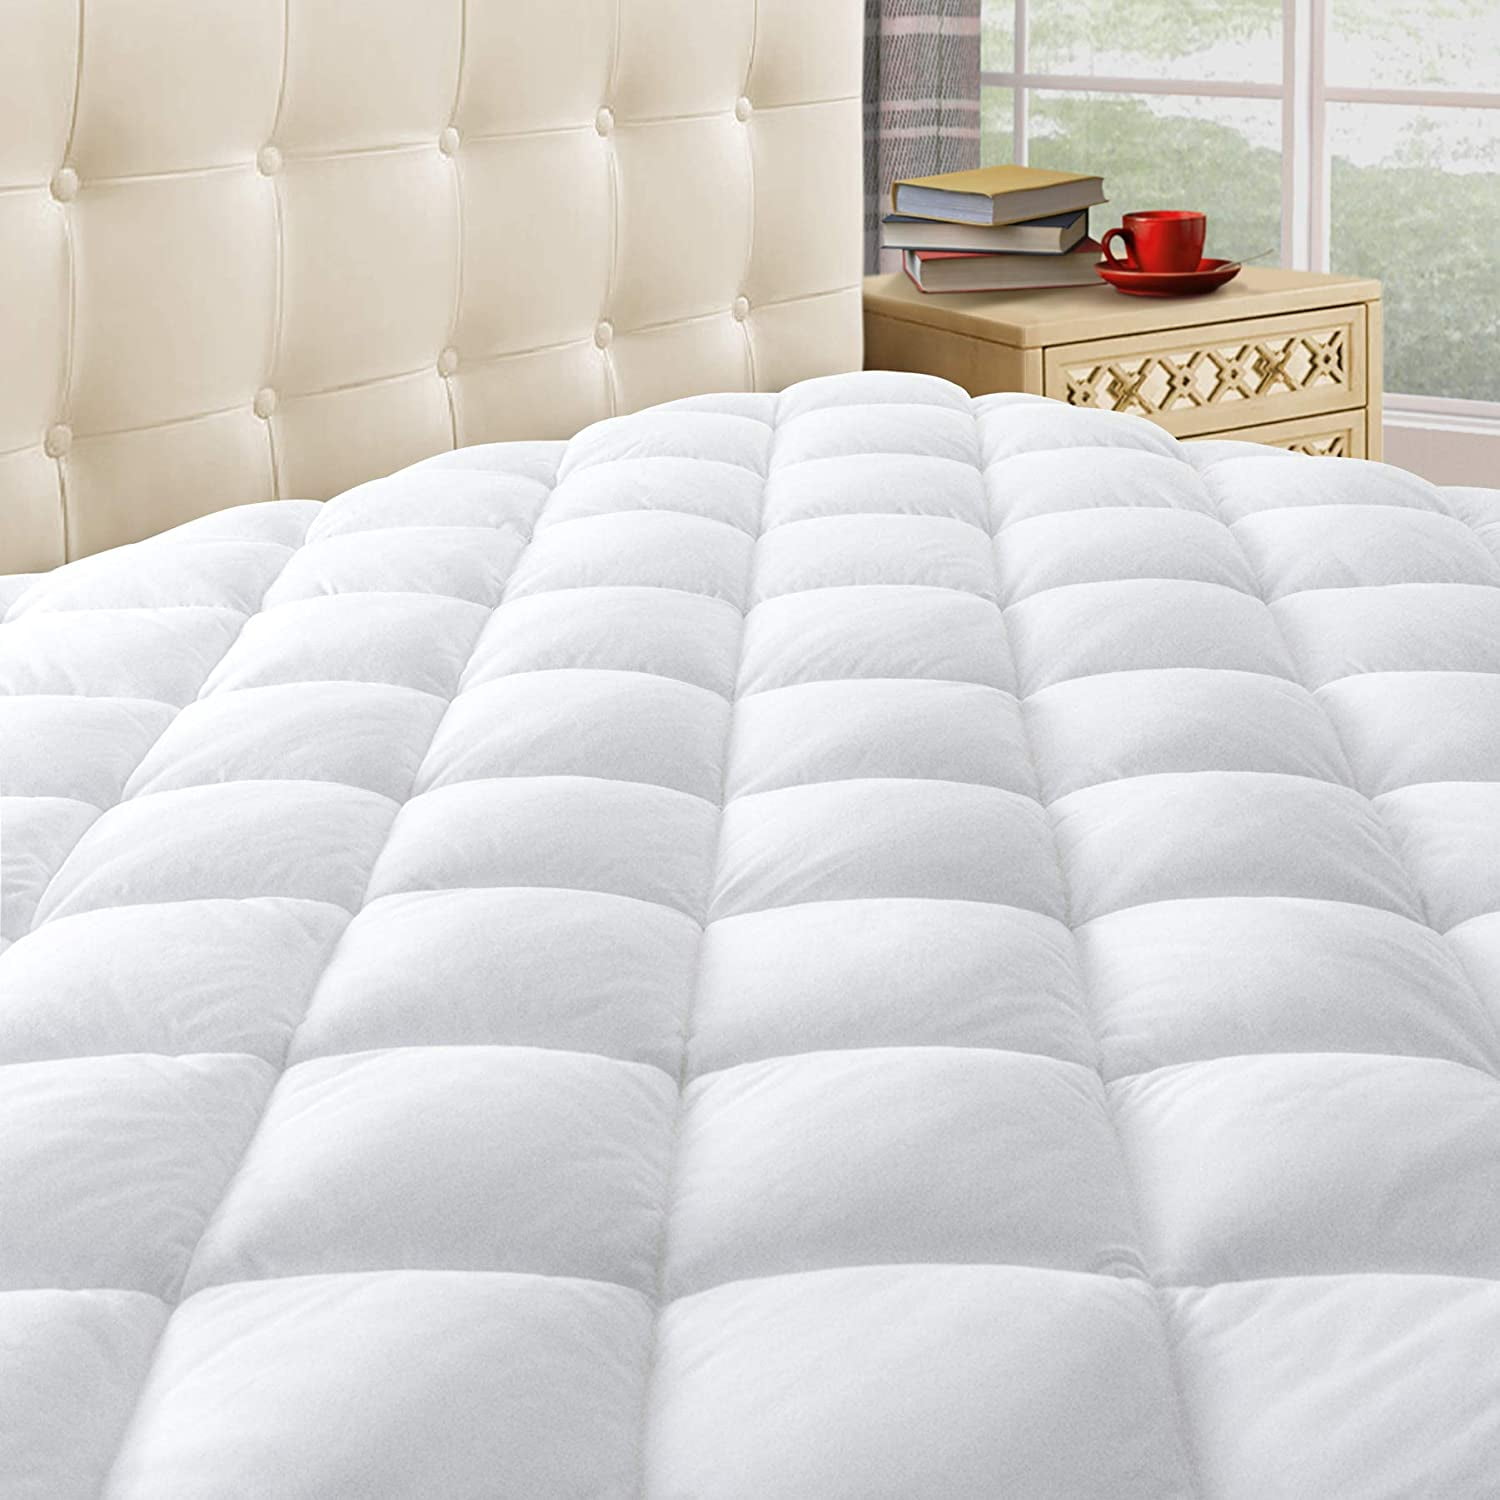 Twin Size Mattress Pad Cover Memory Foam Pillow Top Cooling Overfilled Topper 